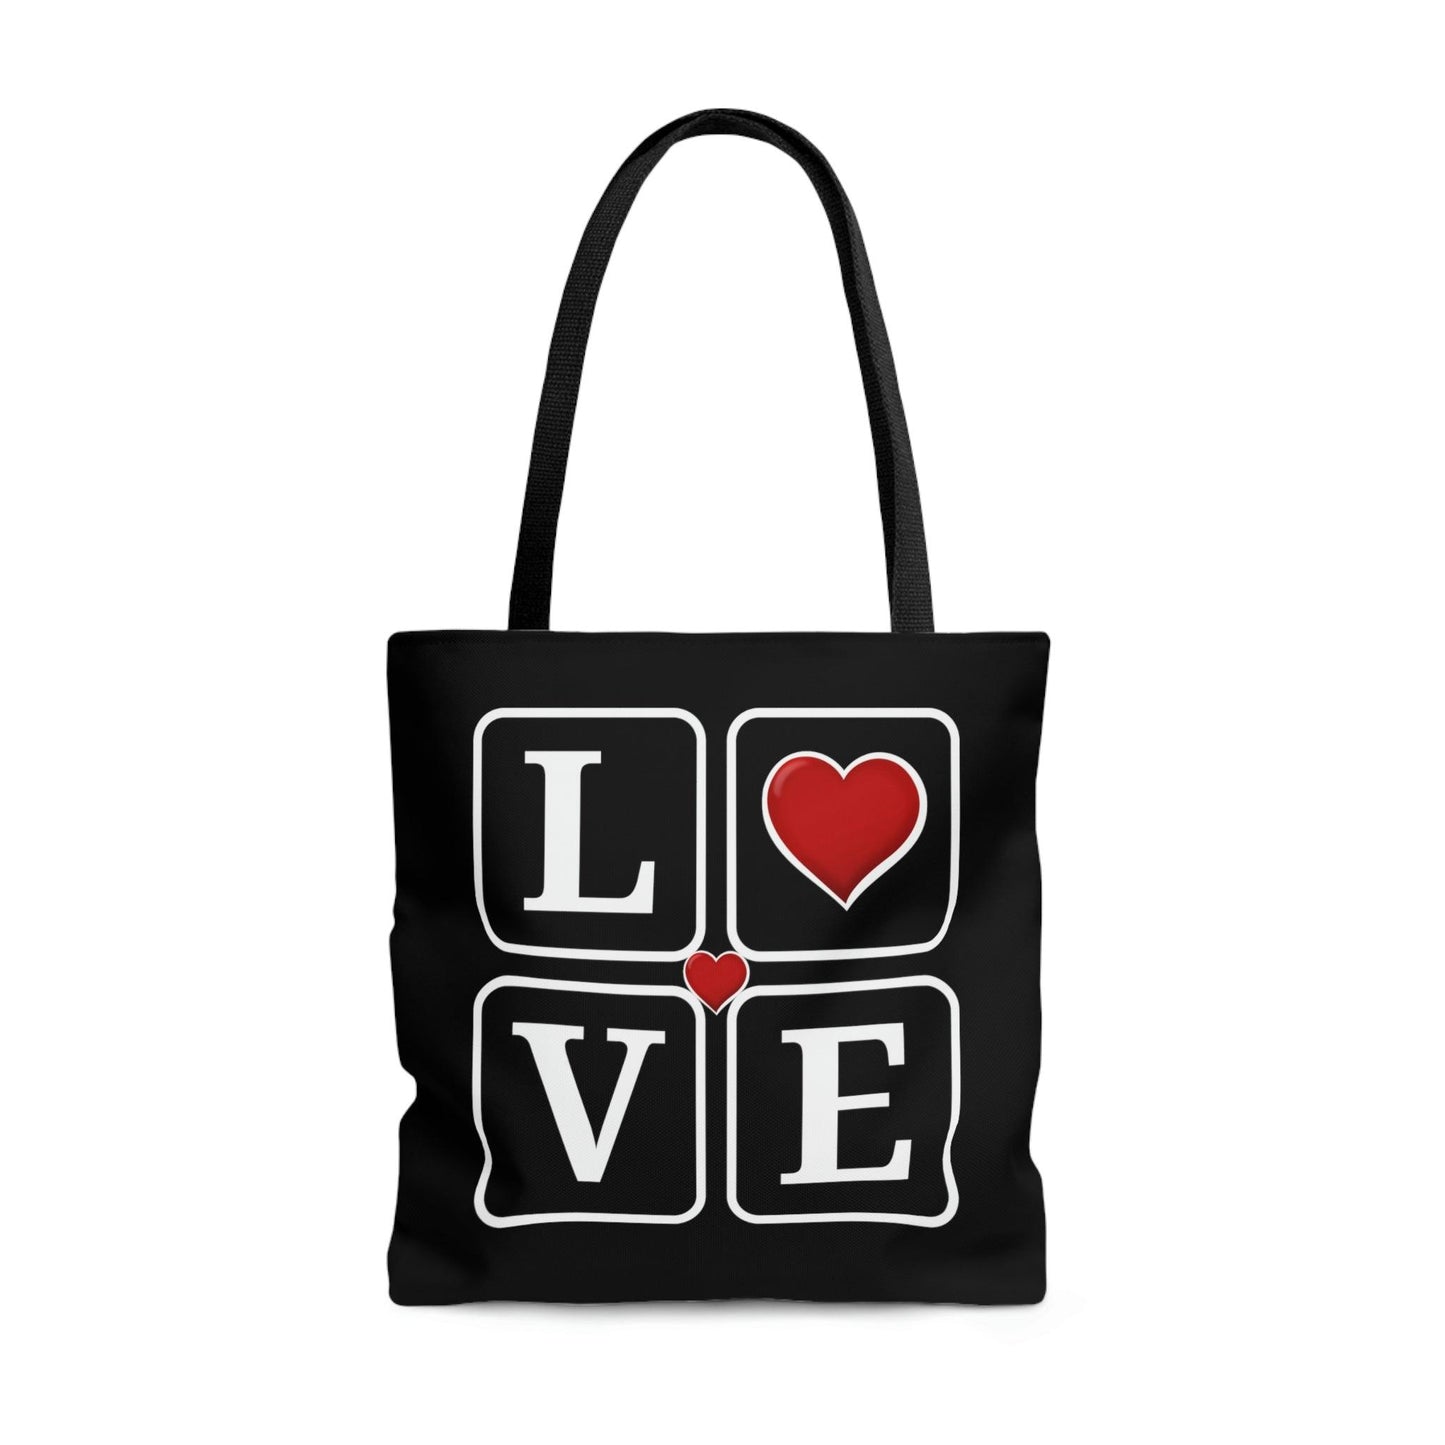 Love Squares with Hearts Tote Bag,